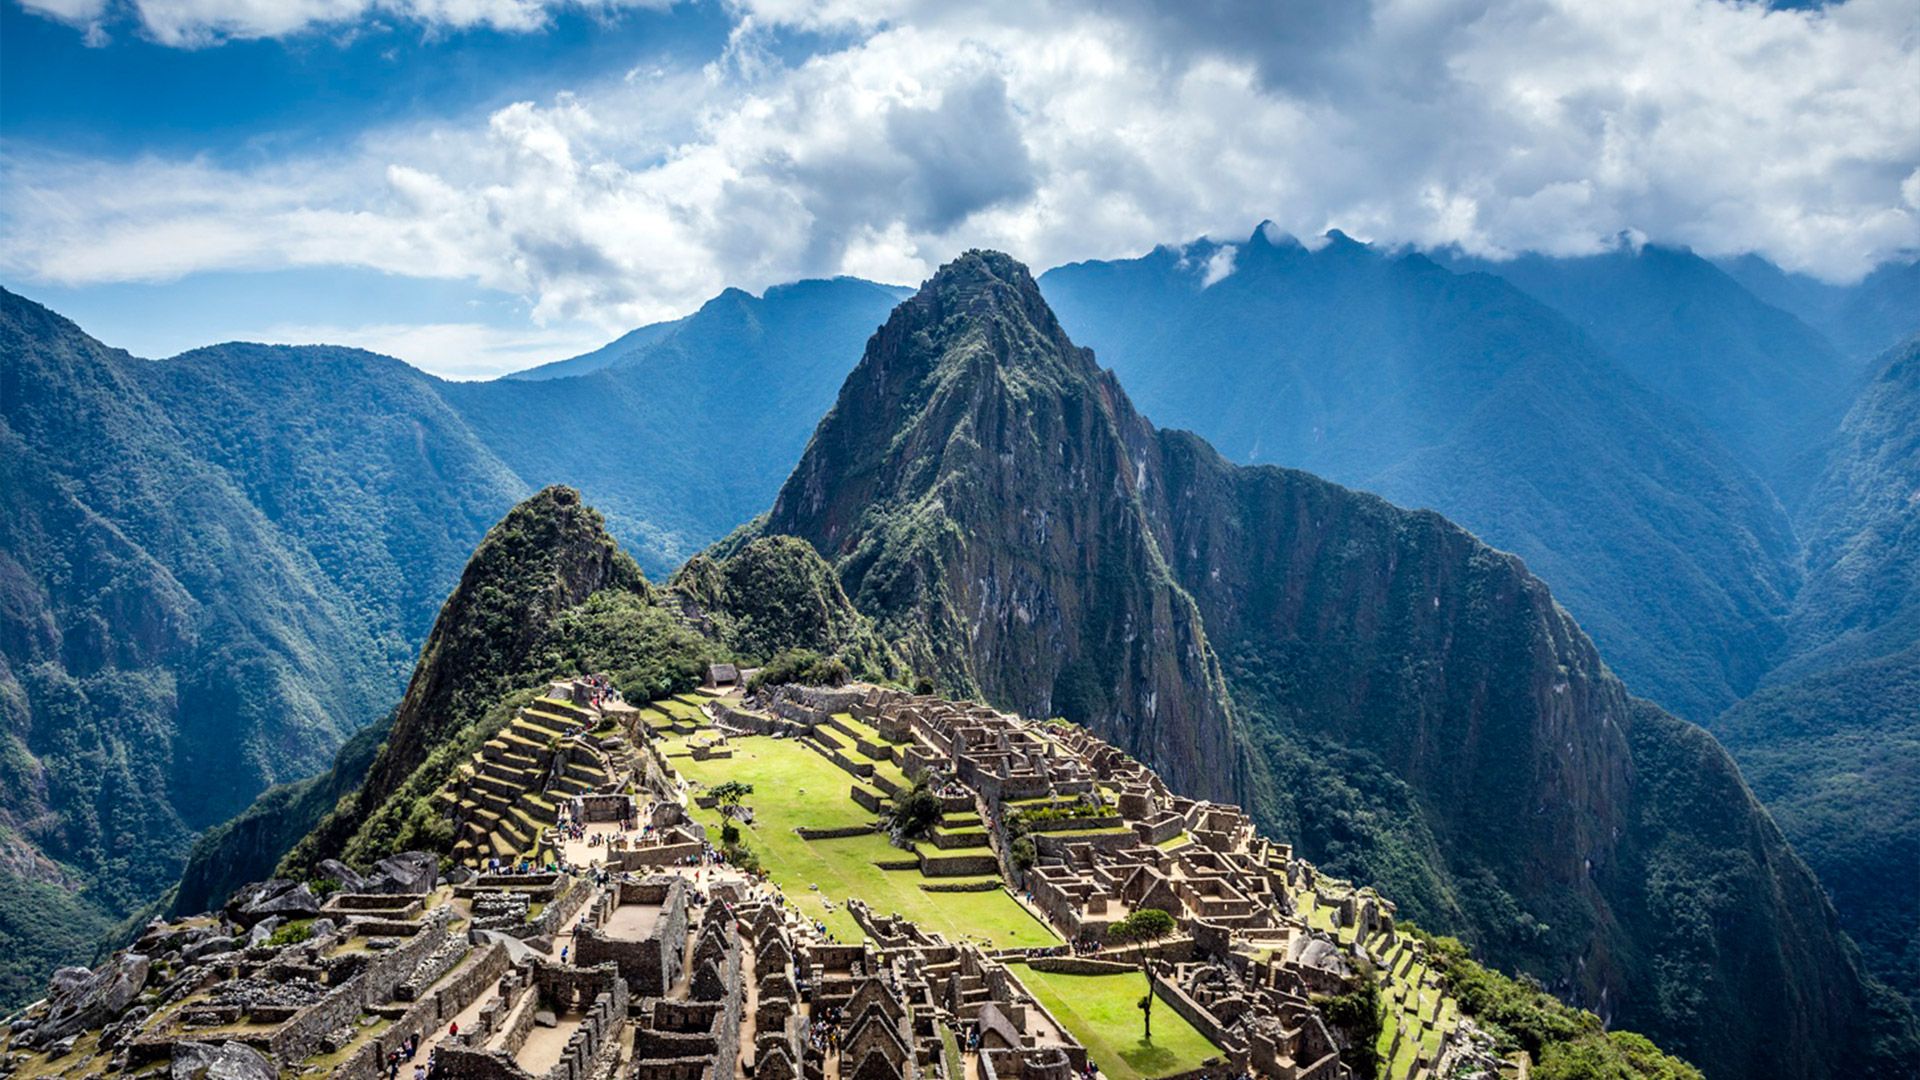 With PayPorter, you can make fast, easy and safe money transfers to Peru at the most affordable prices!